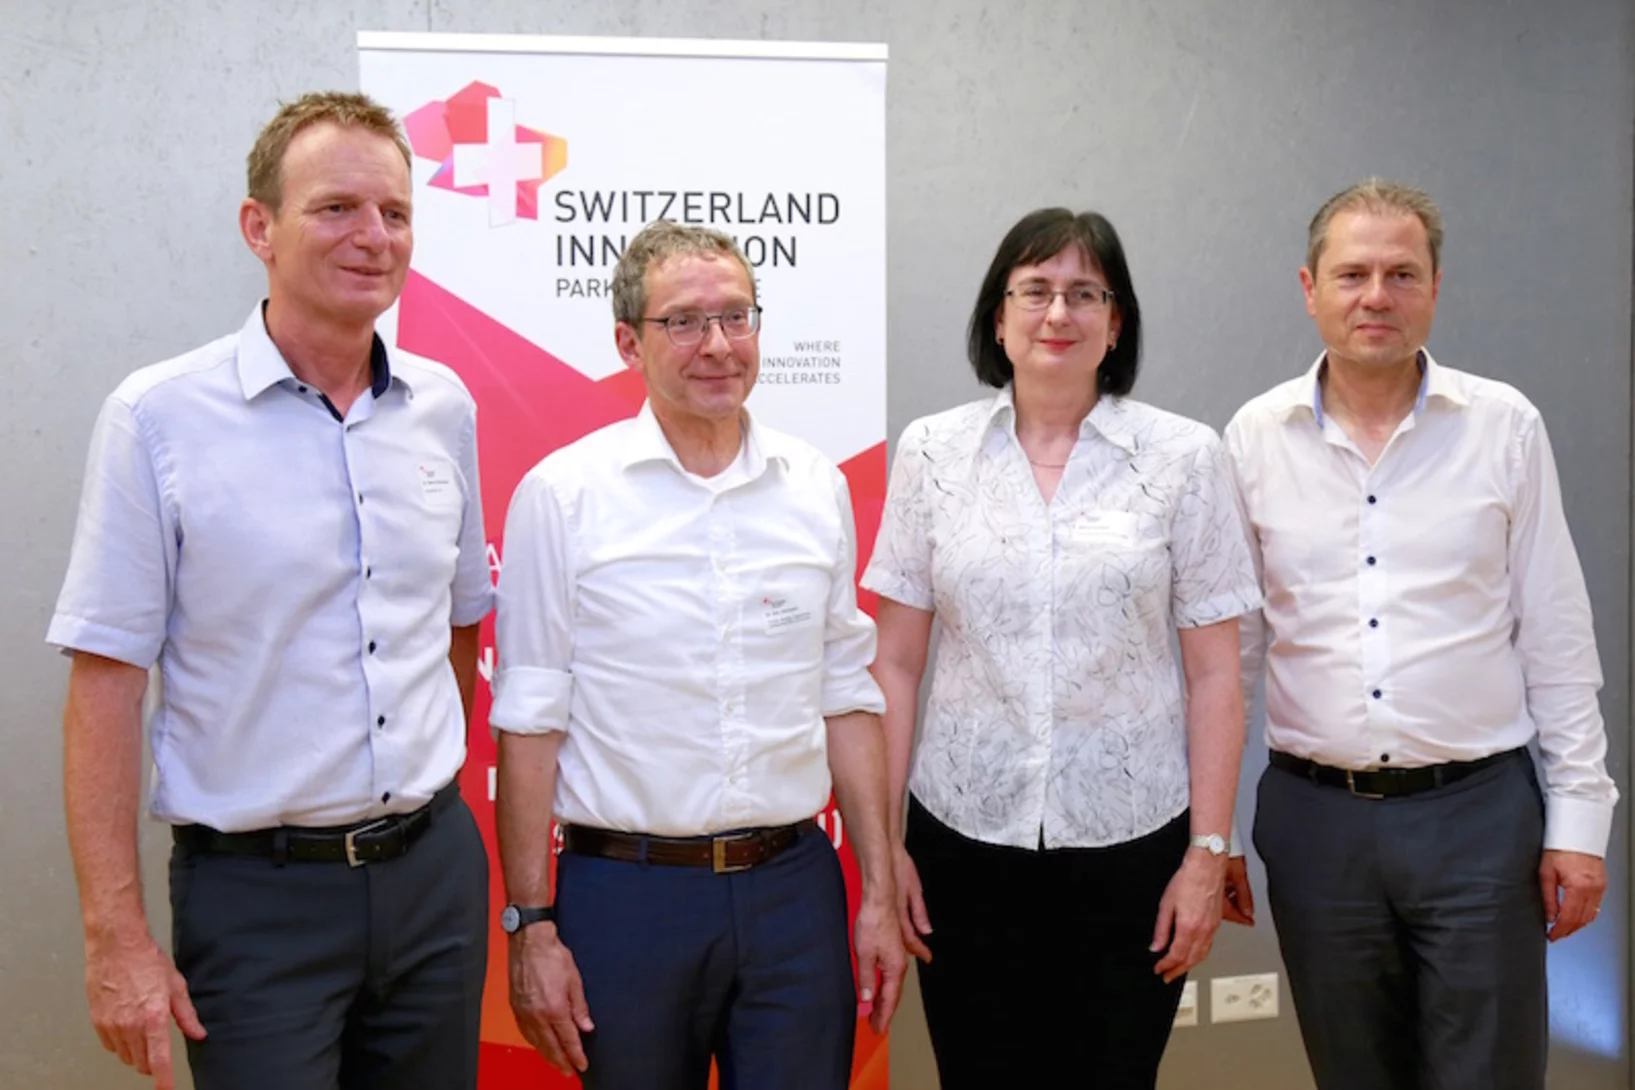 (From left to right) Dr. Benno Rechsteiner, CEO innovAARE AG, Dr. Urs Hofmann, Head of the Department of Economics and Internal Affairs of the Canton of Aargau, Maria Gumann, Chairwoman of the Executive Board of CPV/CAP Pensionskasse Coop, Dr. Remo Lütolf, Chairman of the Board of Directors of innovAARE AG.